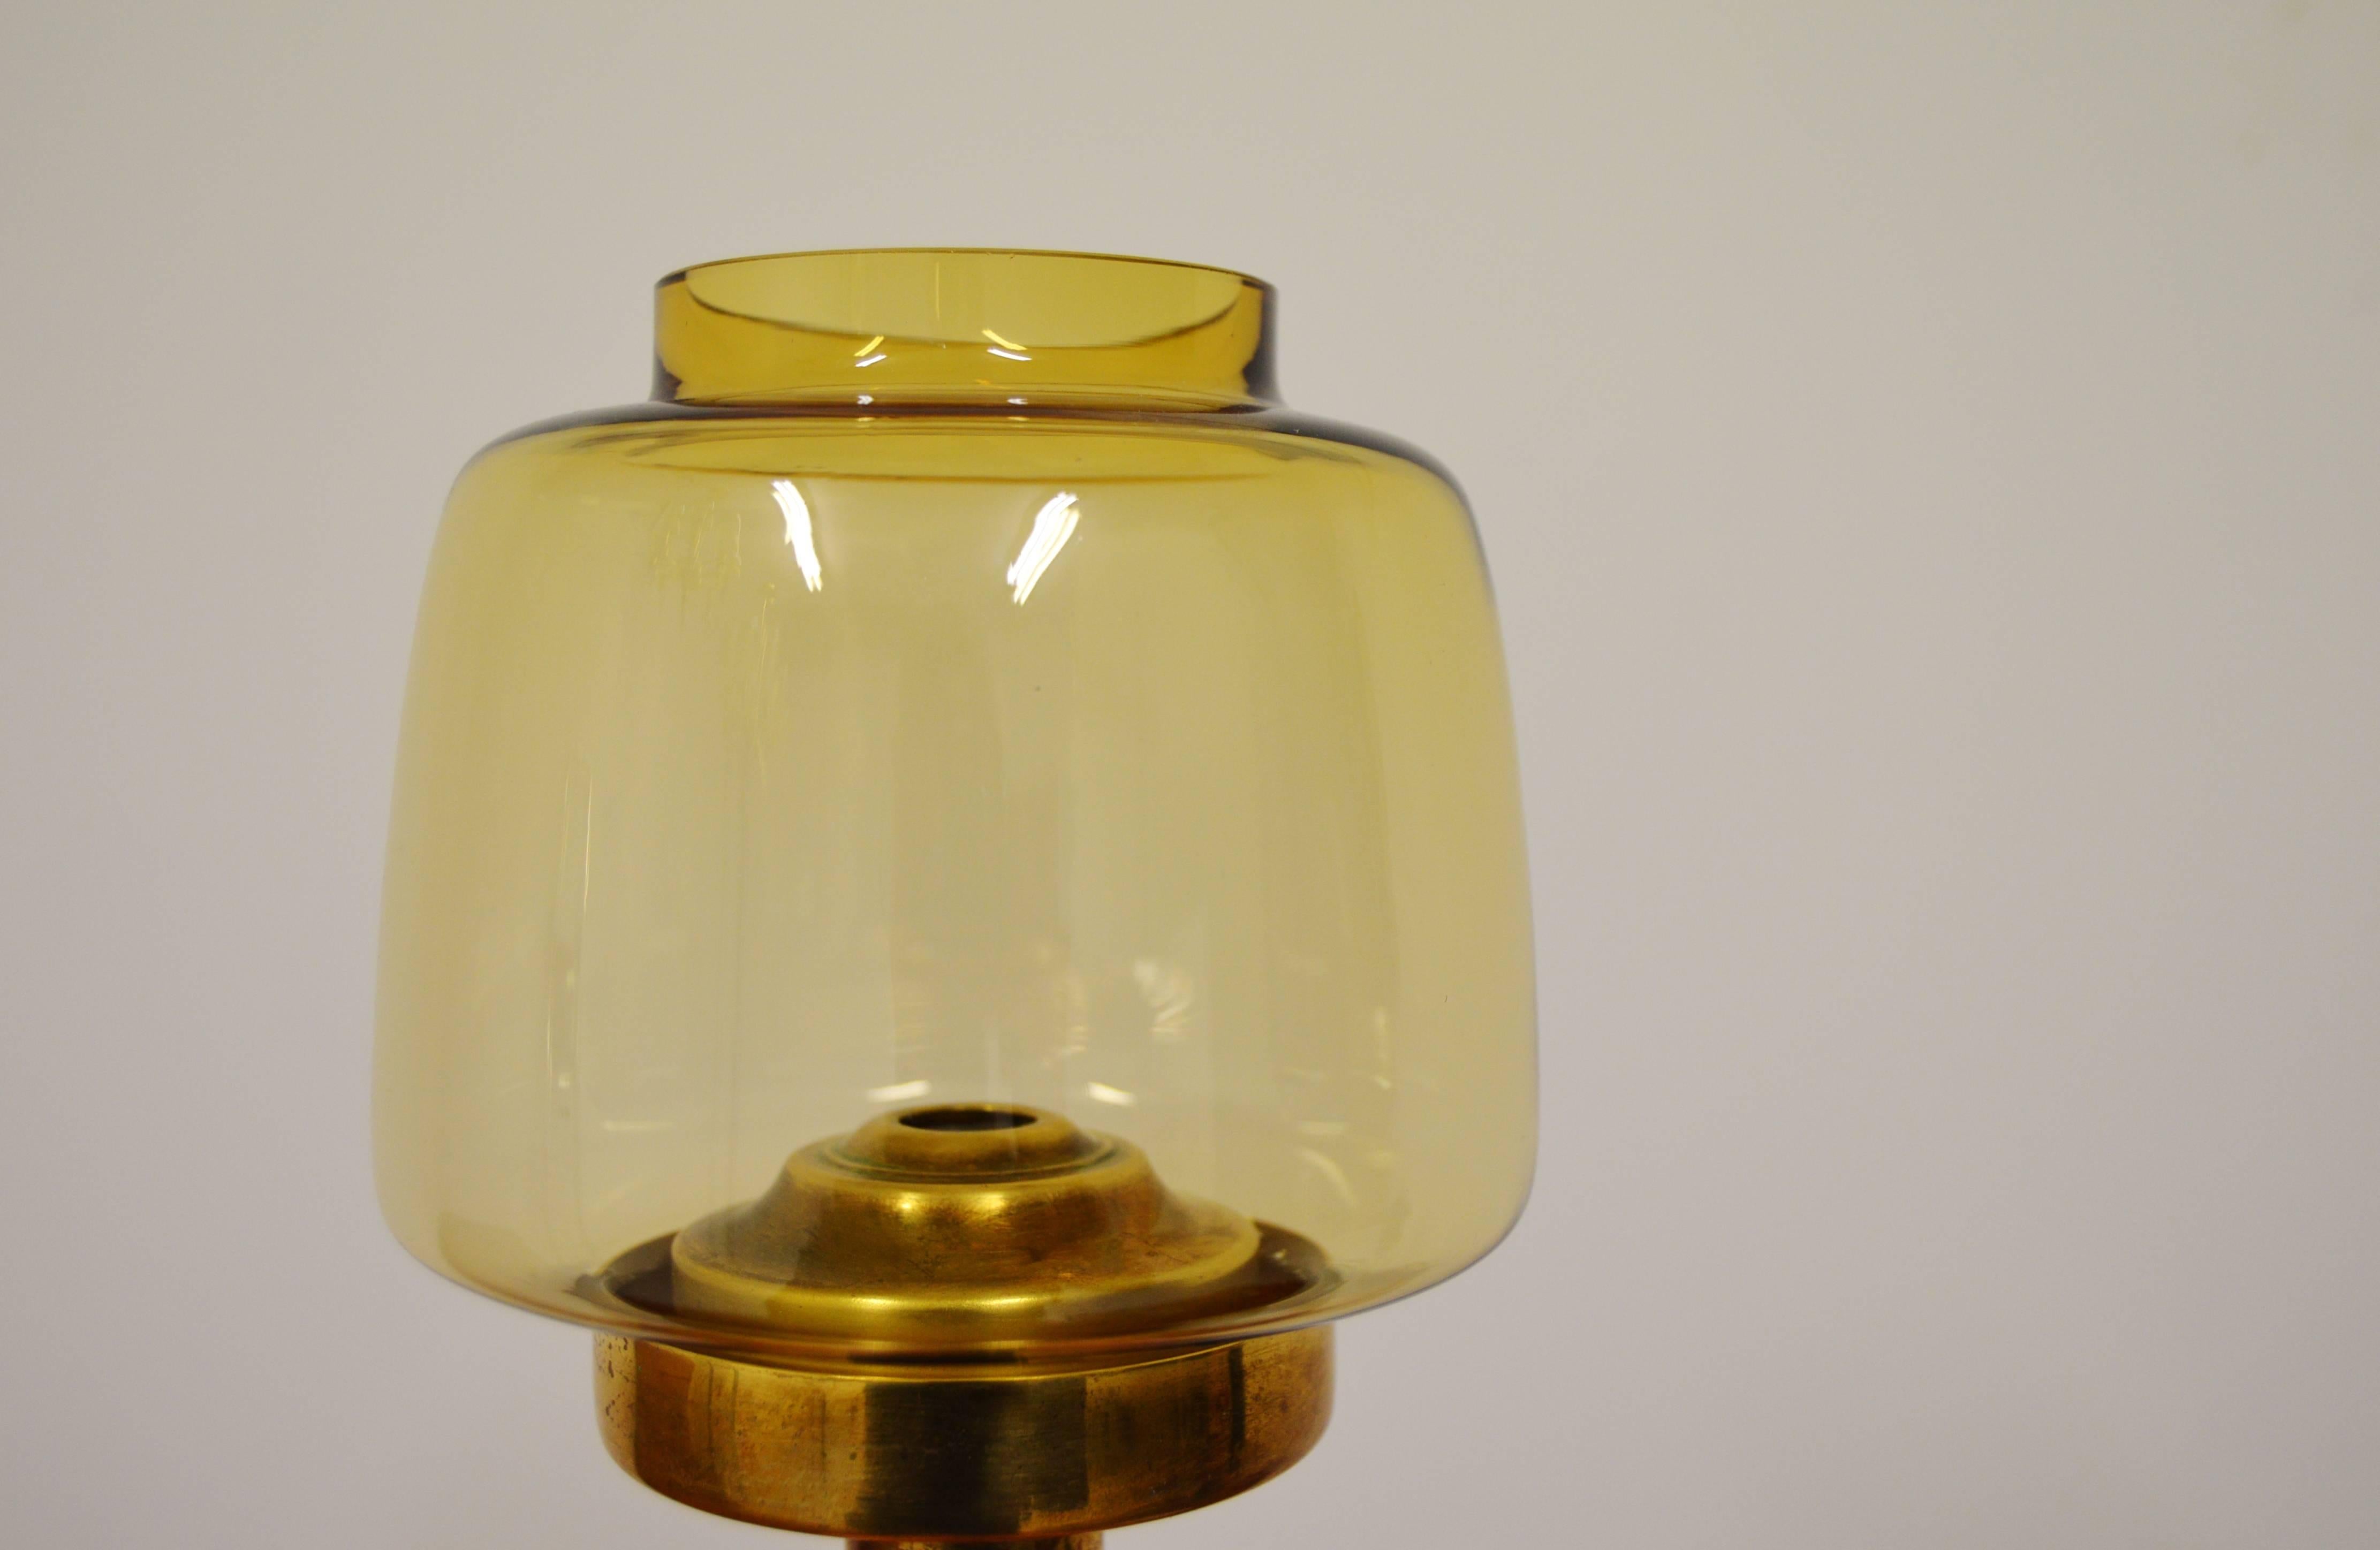 L184 Wall-Mounted Brass and Glass Candleholder by Hans-Agne Jakobsson In Excellent Condition For Sale In Alvesta, SE